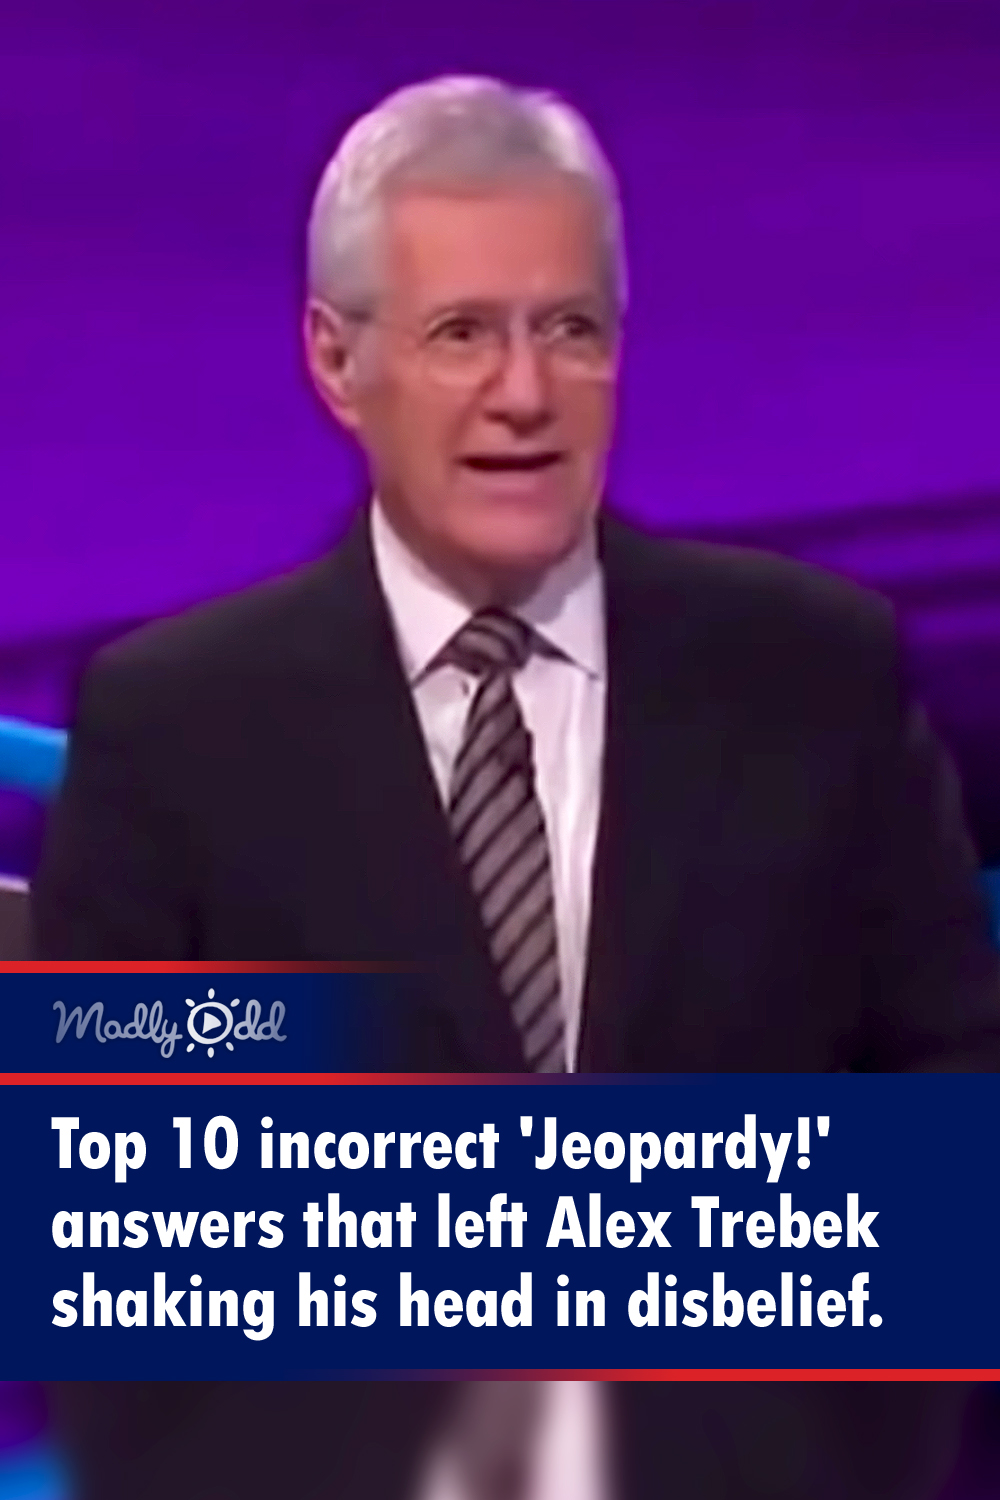 Top 10 incorrect \'Jeopardy!\' answers that left Alex Trebek shaking his head in disbelief